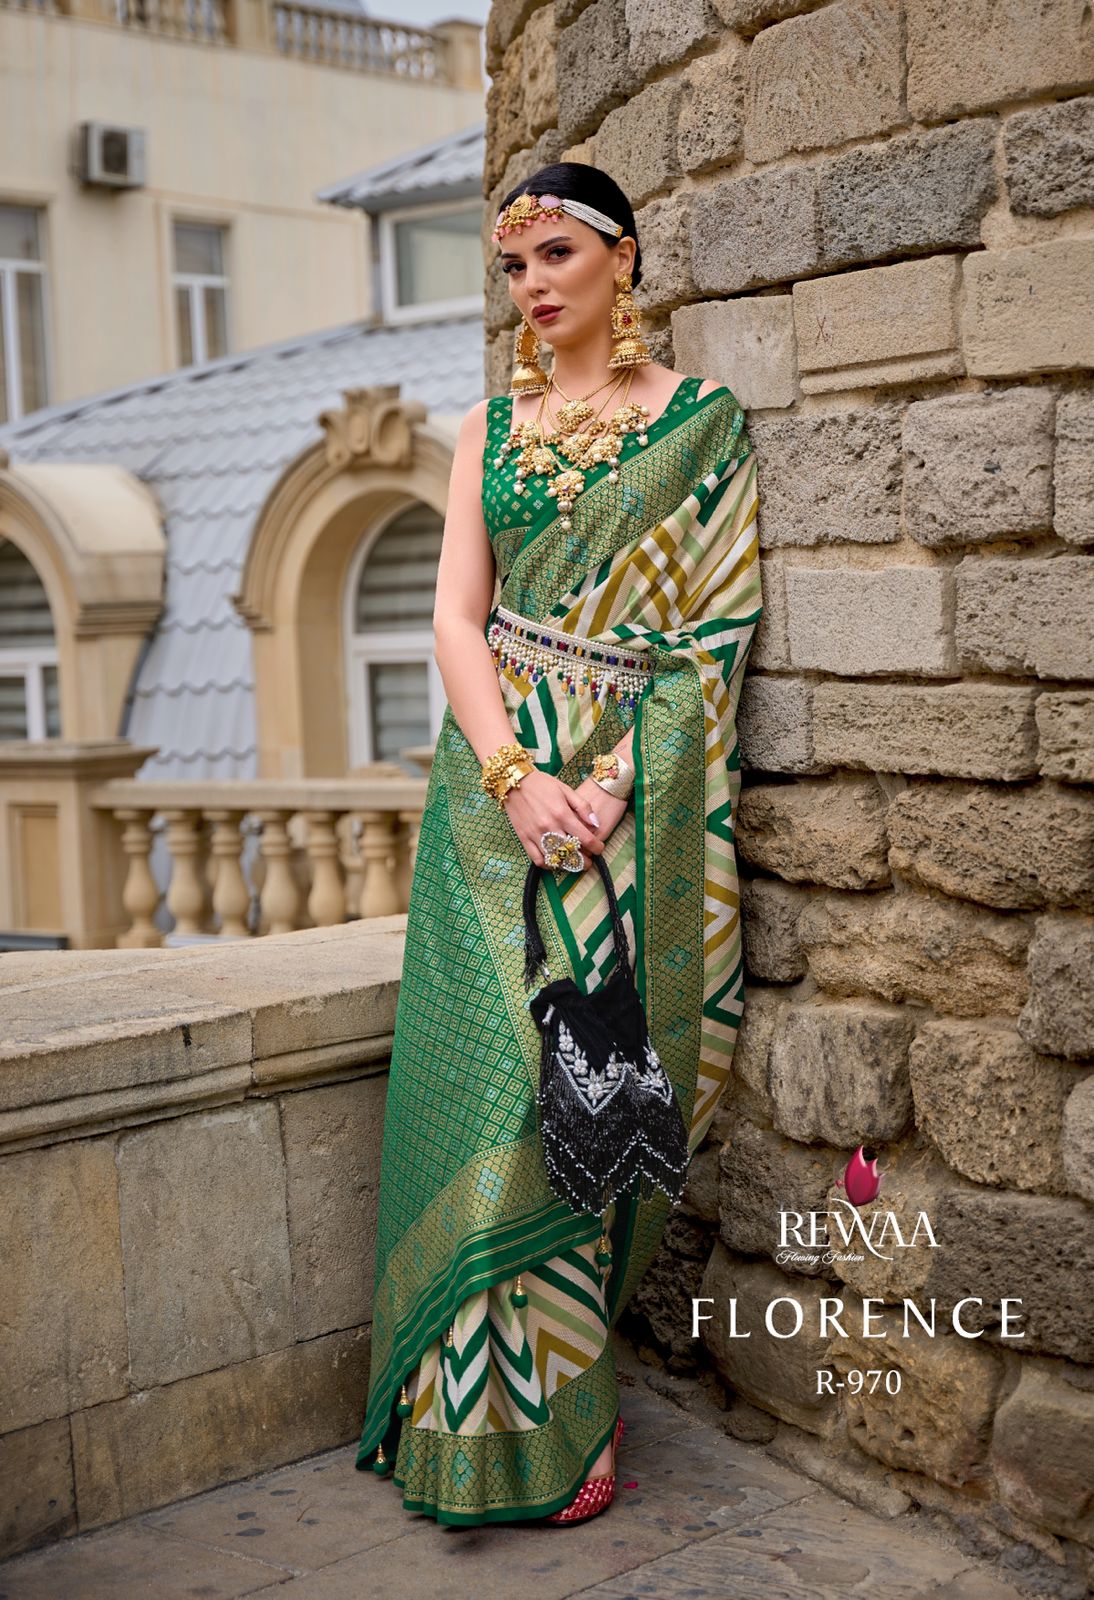 Rewaa Florence collection 9